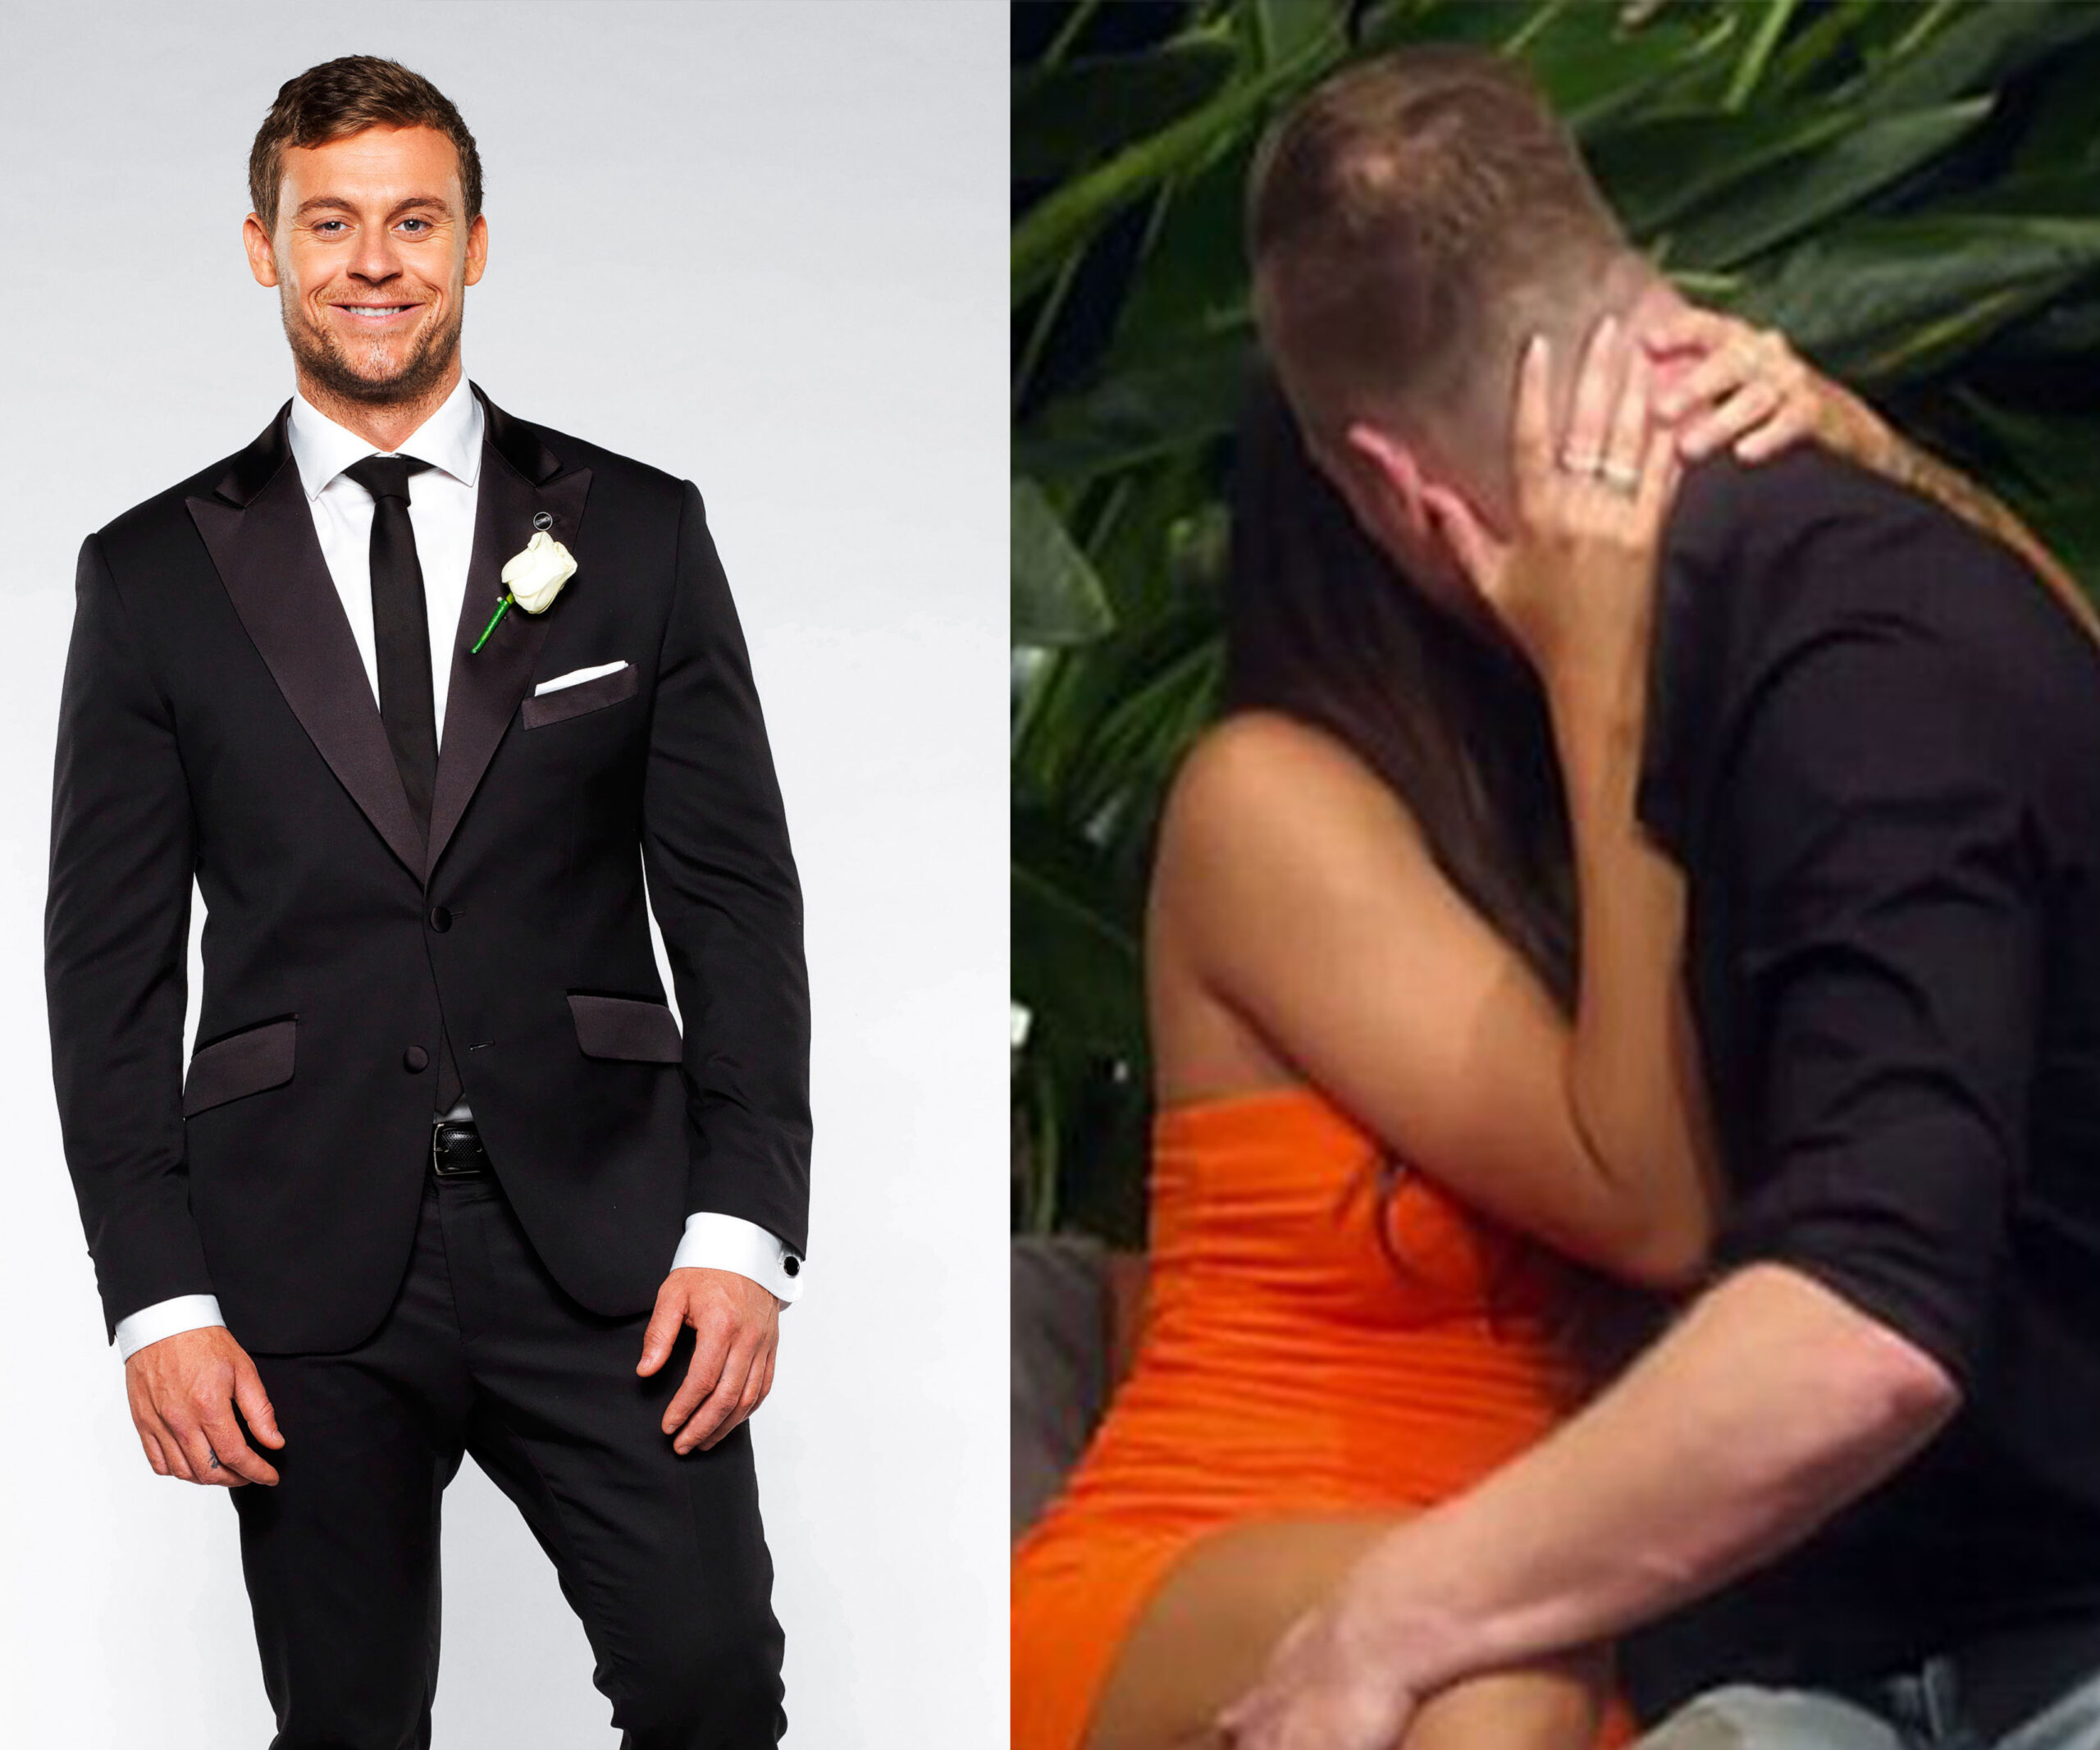 MAFS’ Ryan says he ‘felt like an idiot’ after Dean and Davina cheating scandal